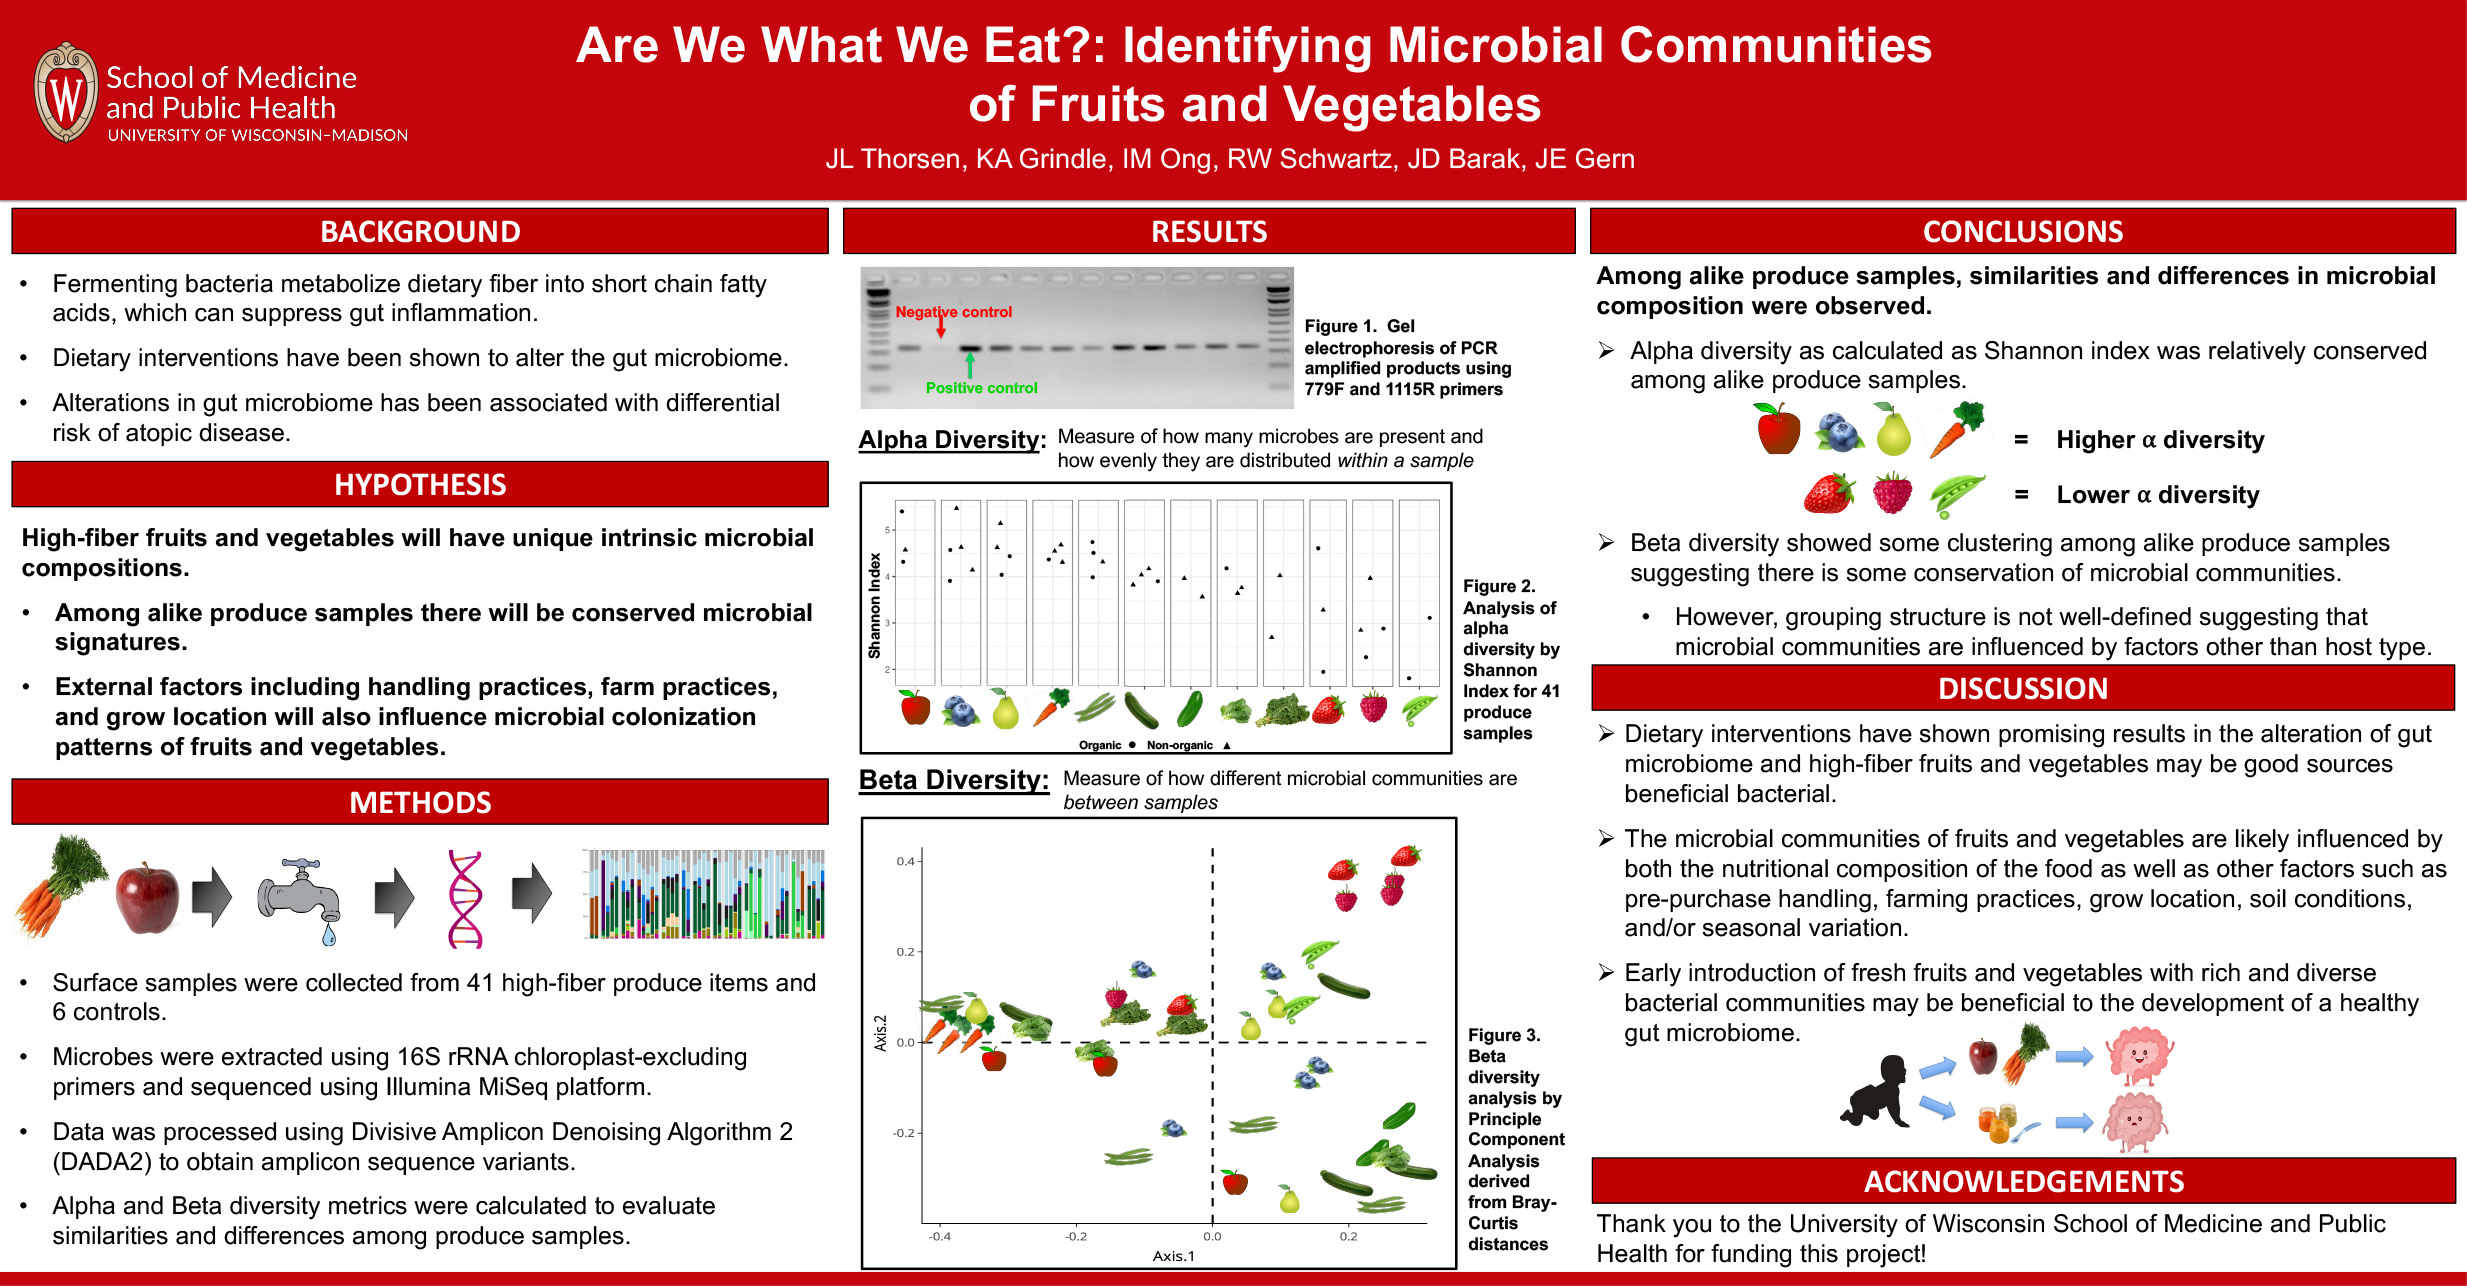 Are We What We Eat?: Identifying Microbial Communities of Fruits and Vegetables poster image